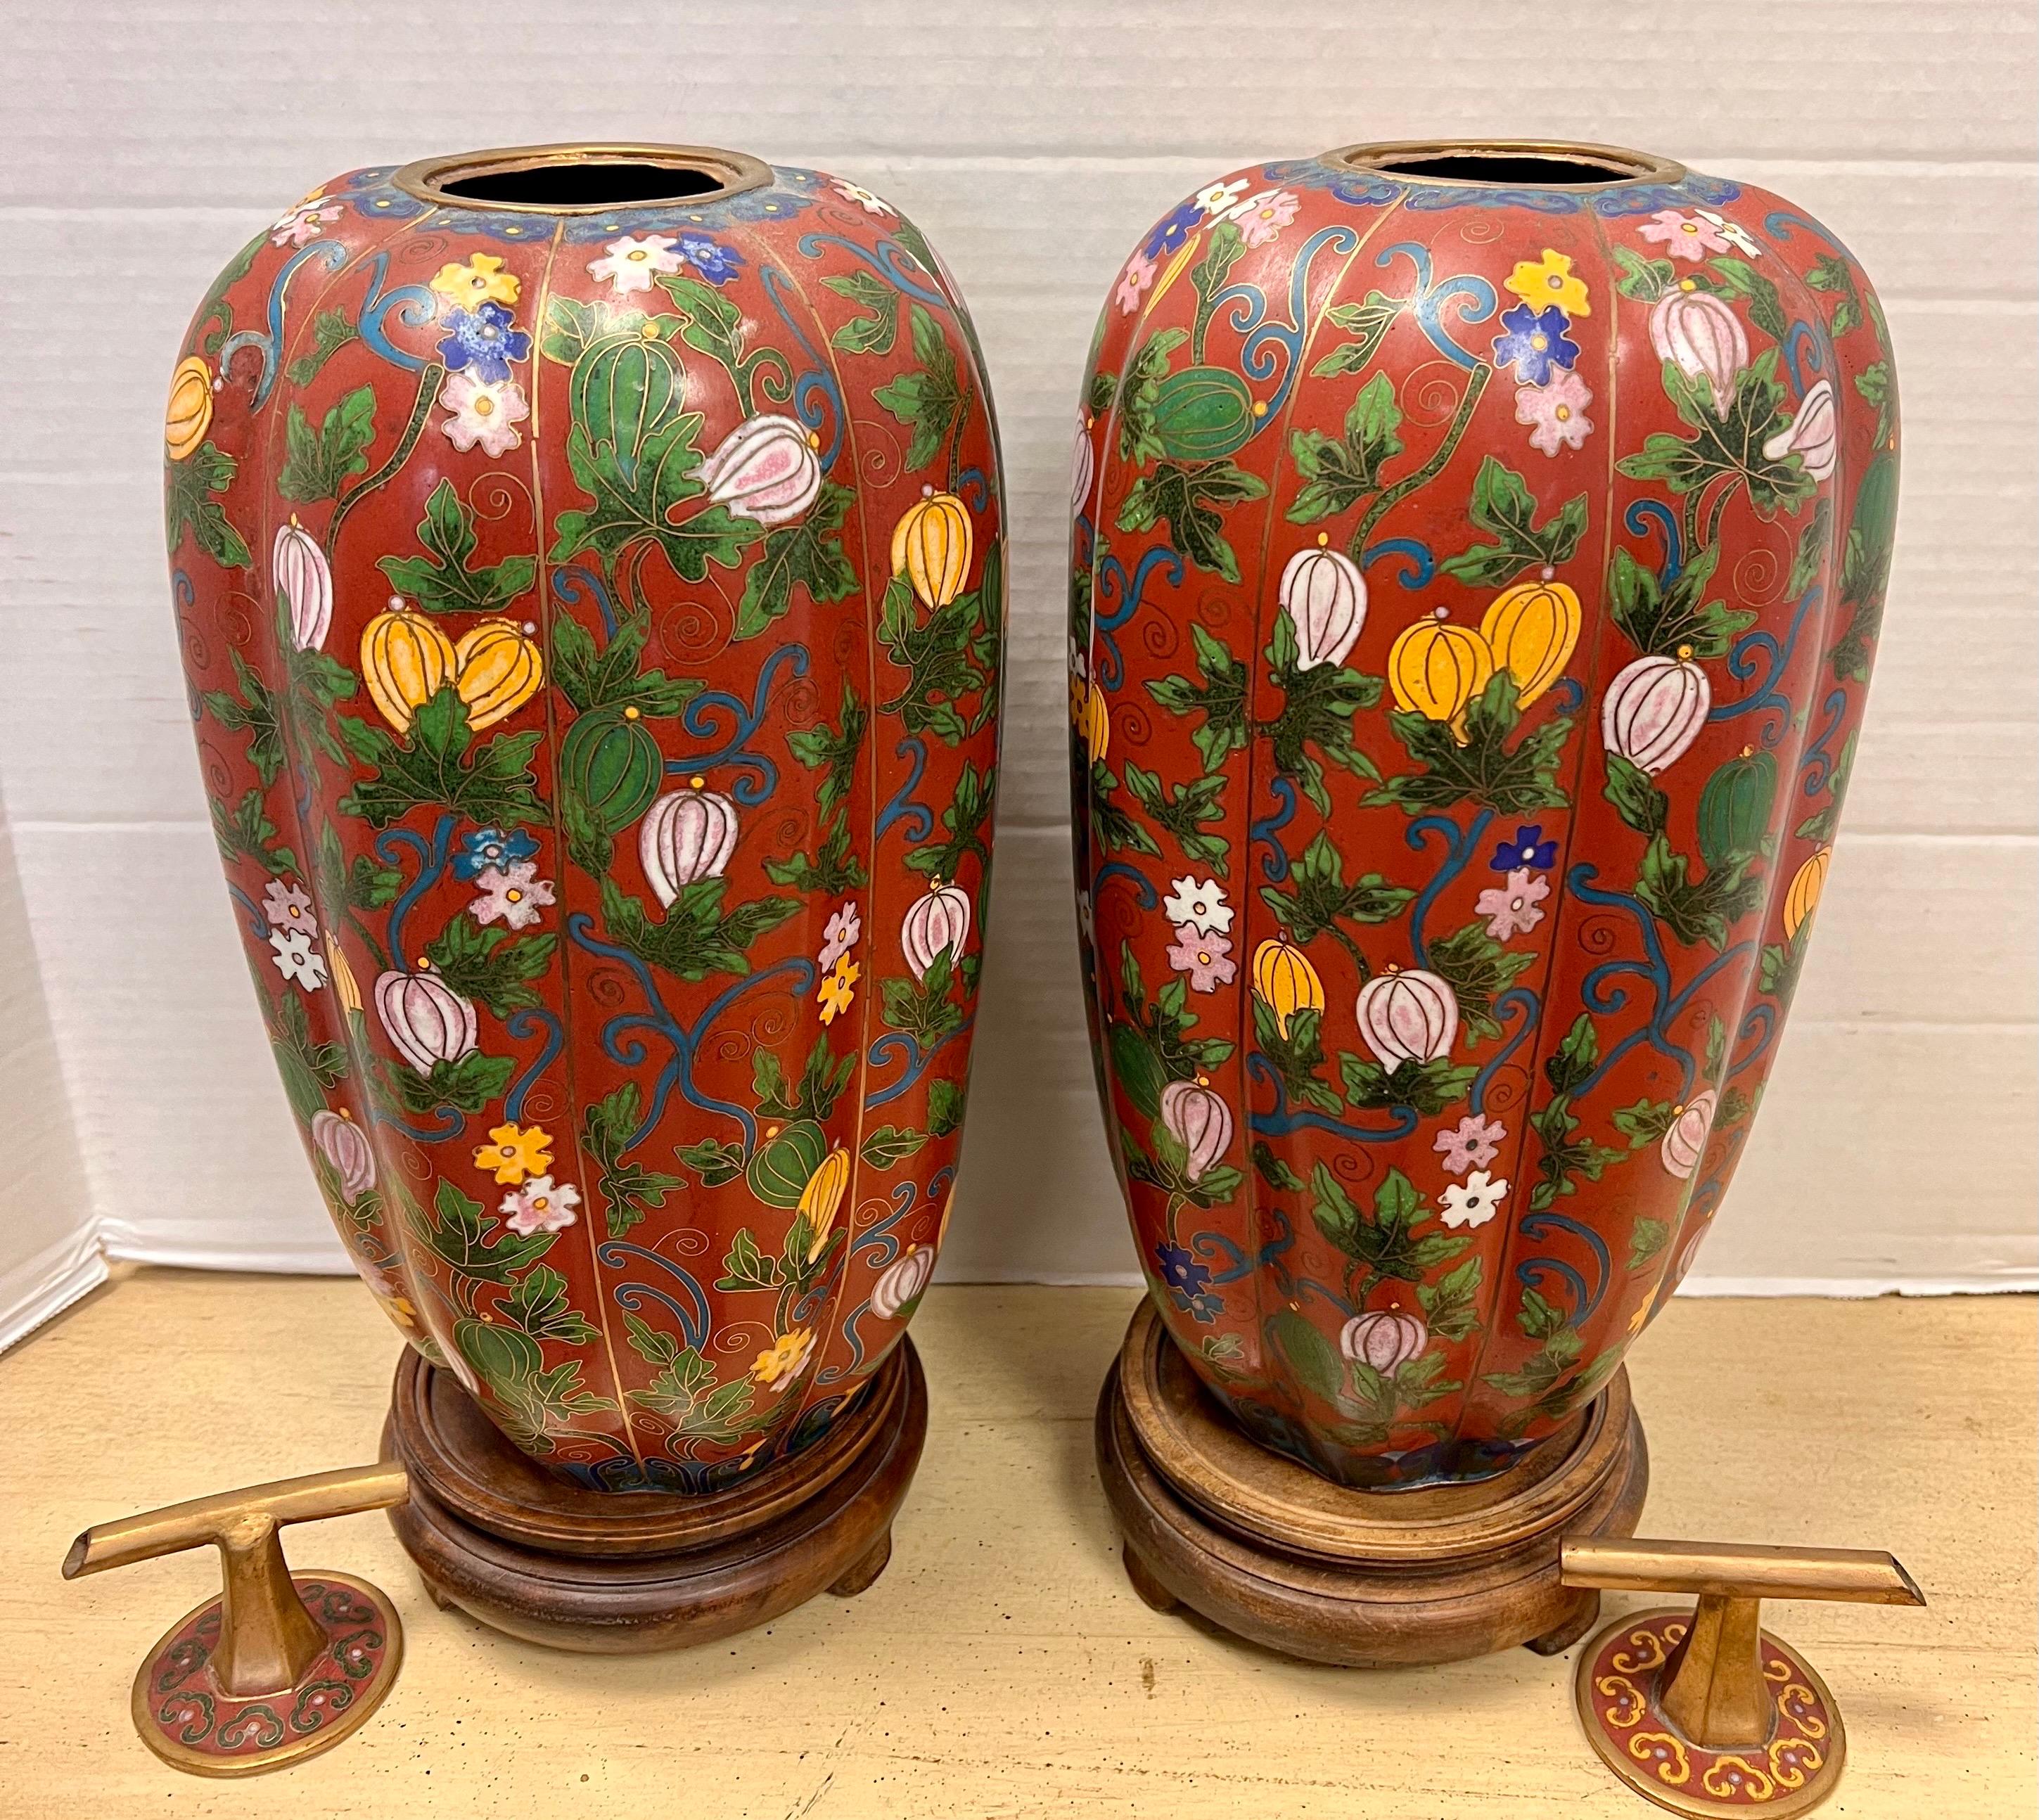 Gold Pair of Chinese Red and Bronze Cloisonne Gourd Covered Urns Jars